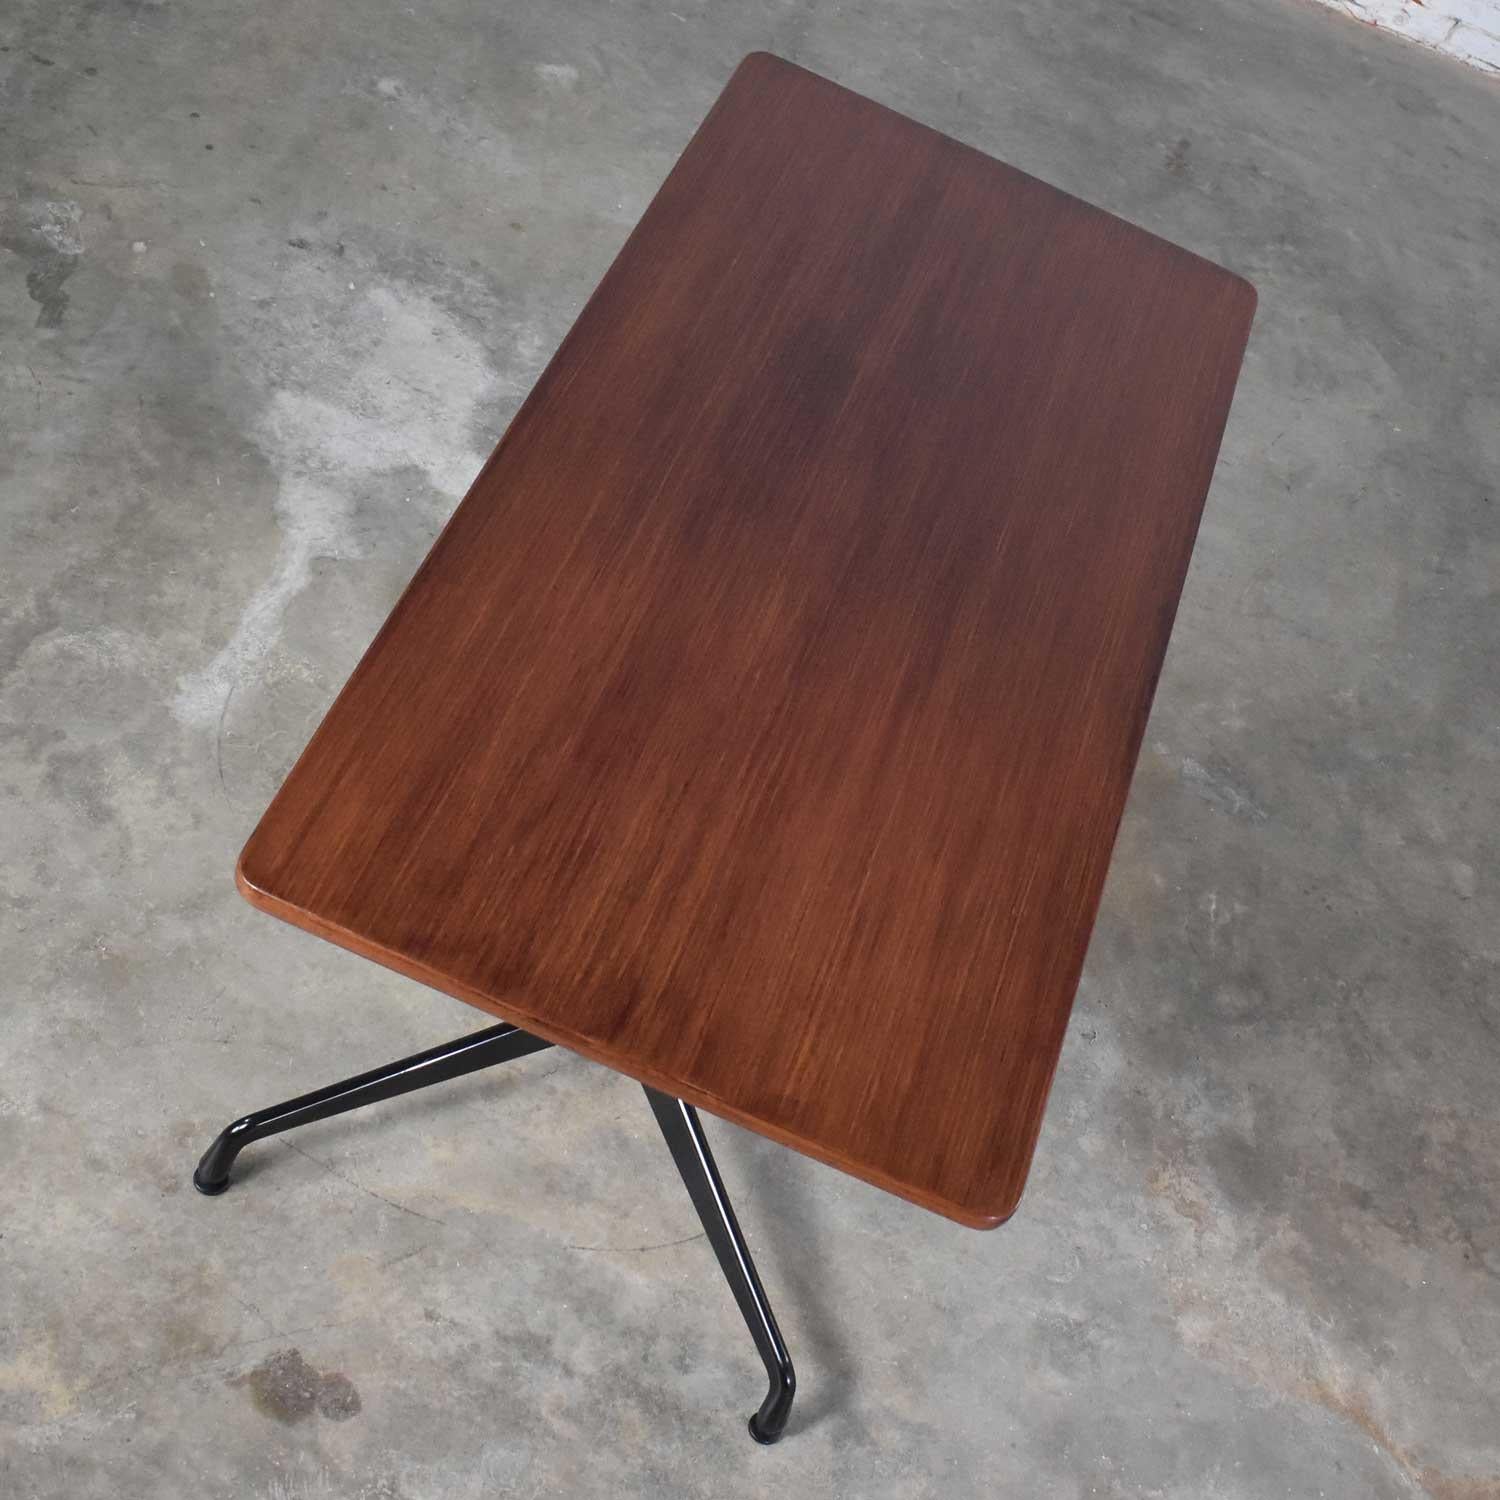 American Eames Herman Miller Aluminum Group Conference or Dining Table Rosewood and Black